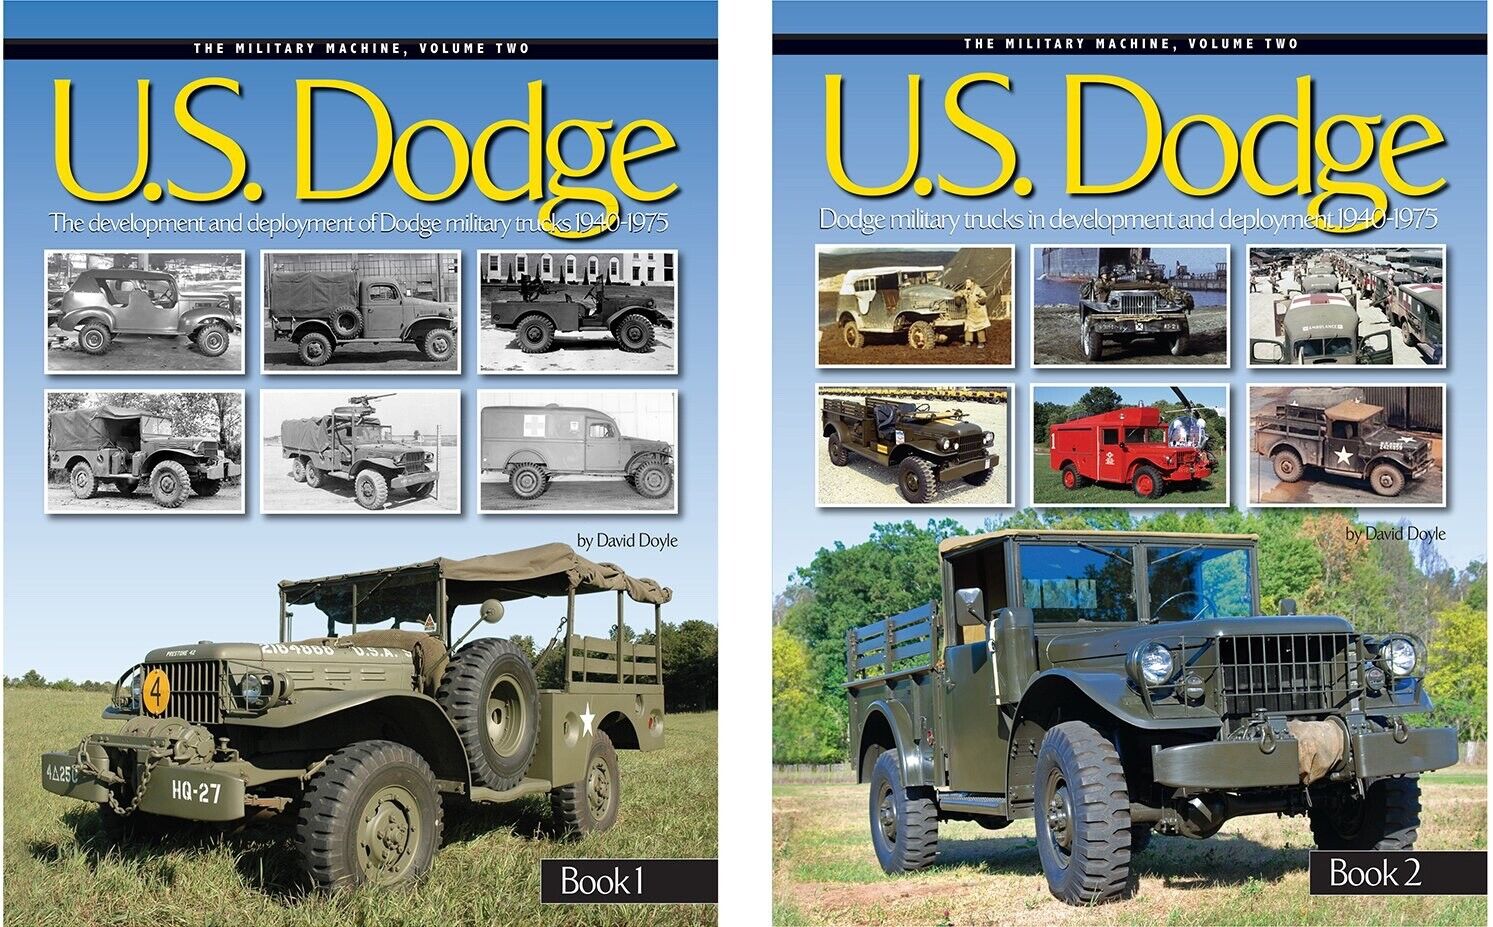 US Dodge The development and deployment of Dodge military trucks 1940-1975 Doyle